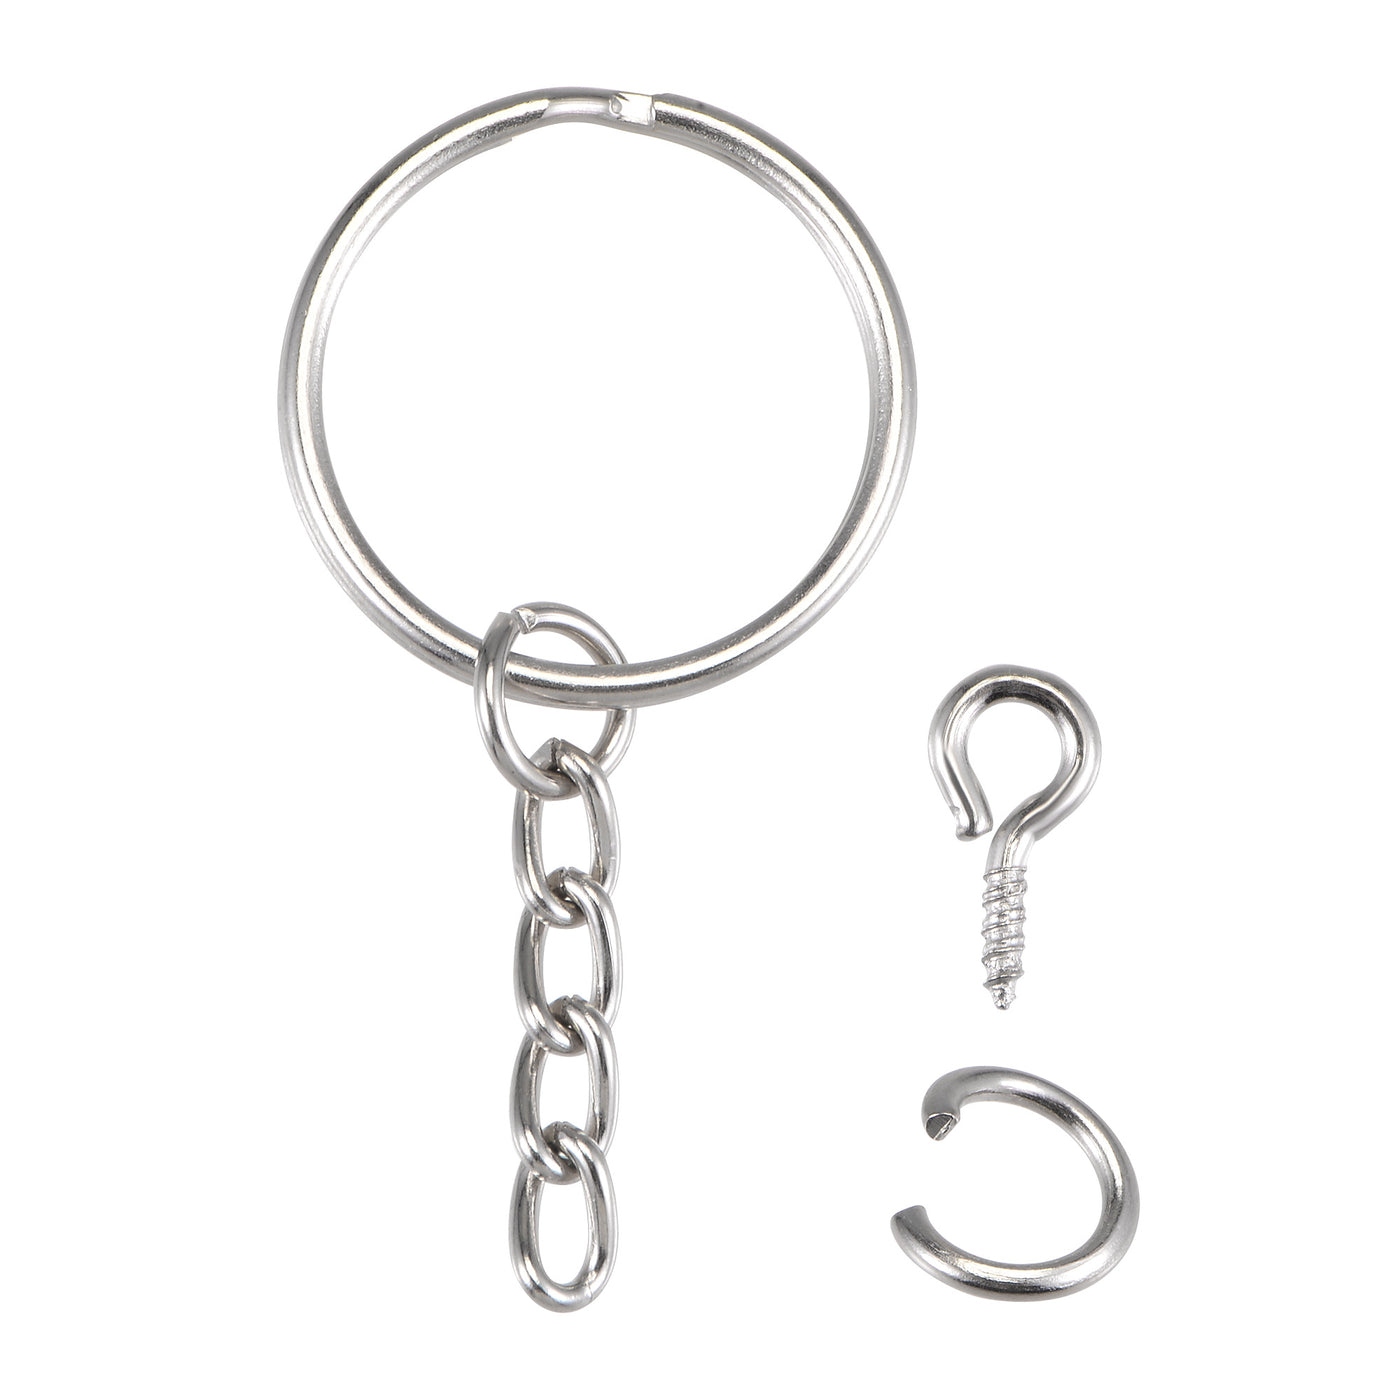 uxcell Uxcell Split Key Ring with Chain 1.5x25mm, with 8mm Open Jump Ring Connectors, with 10mm Small Screw Eye Pins, Nickel Plated Iron, Pack of 20